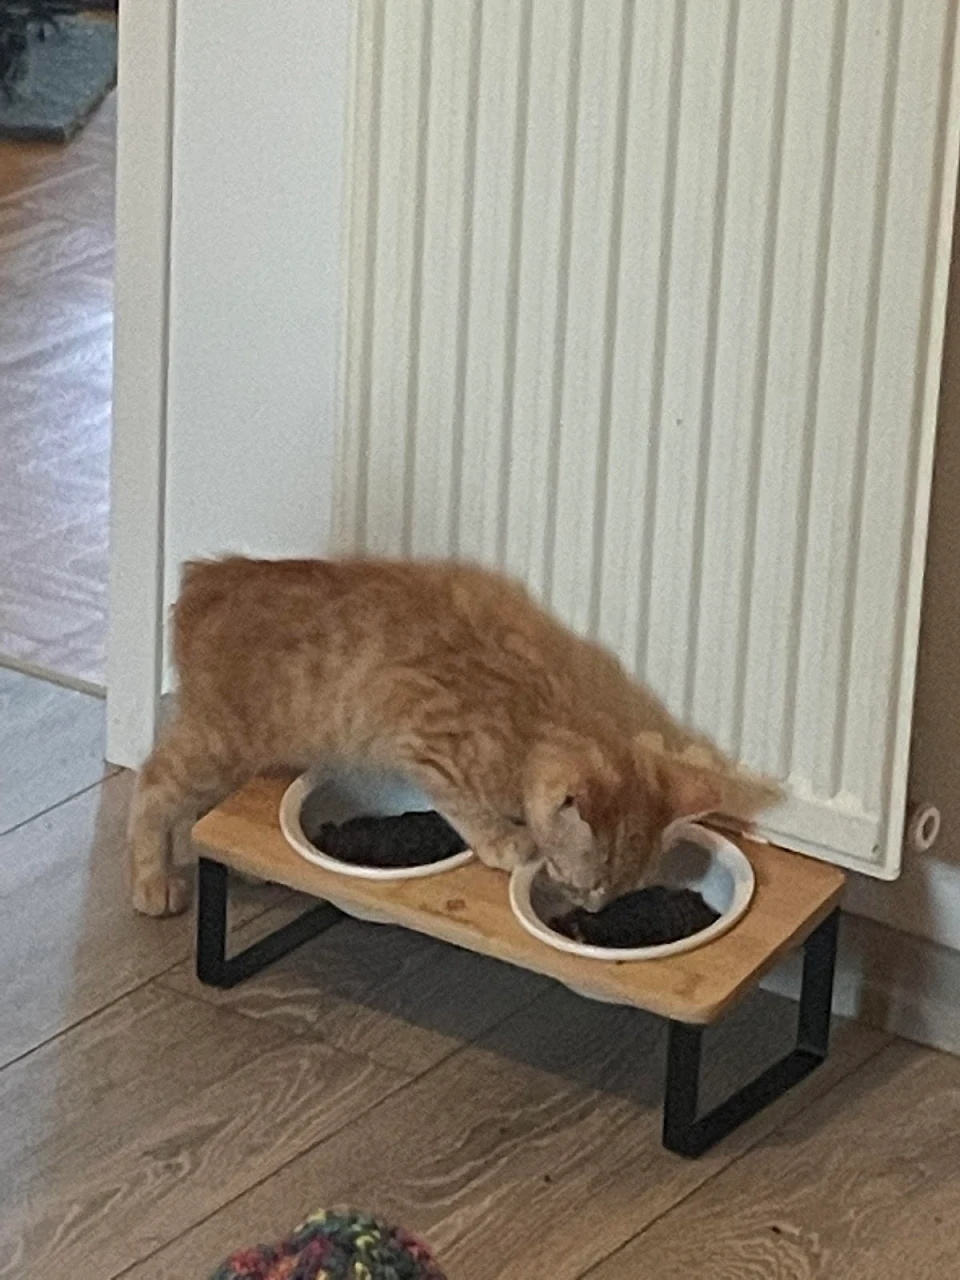 My cat doesn’t seem to understand how to use his ergonomic foodbowl